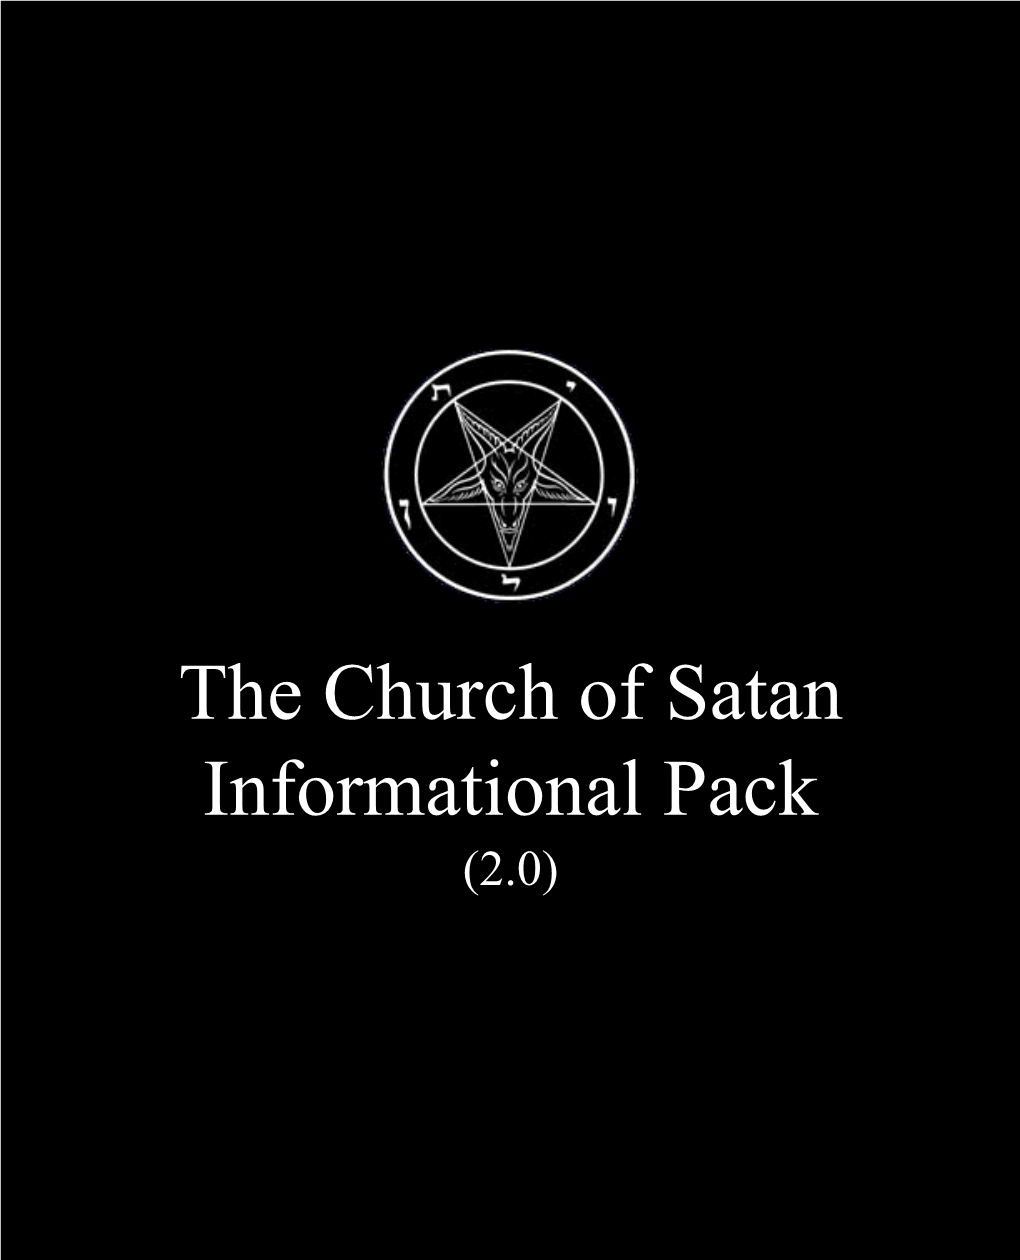 The Church of Satan Informational Pack